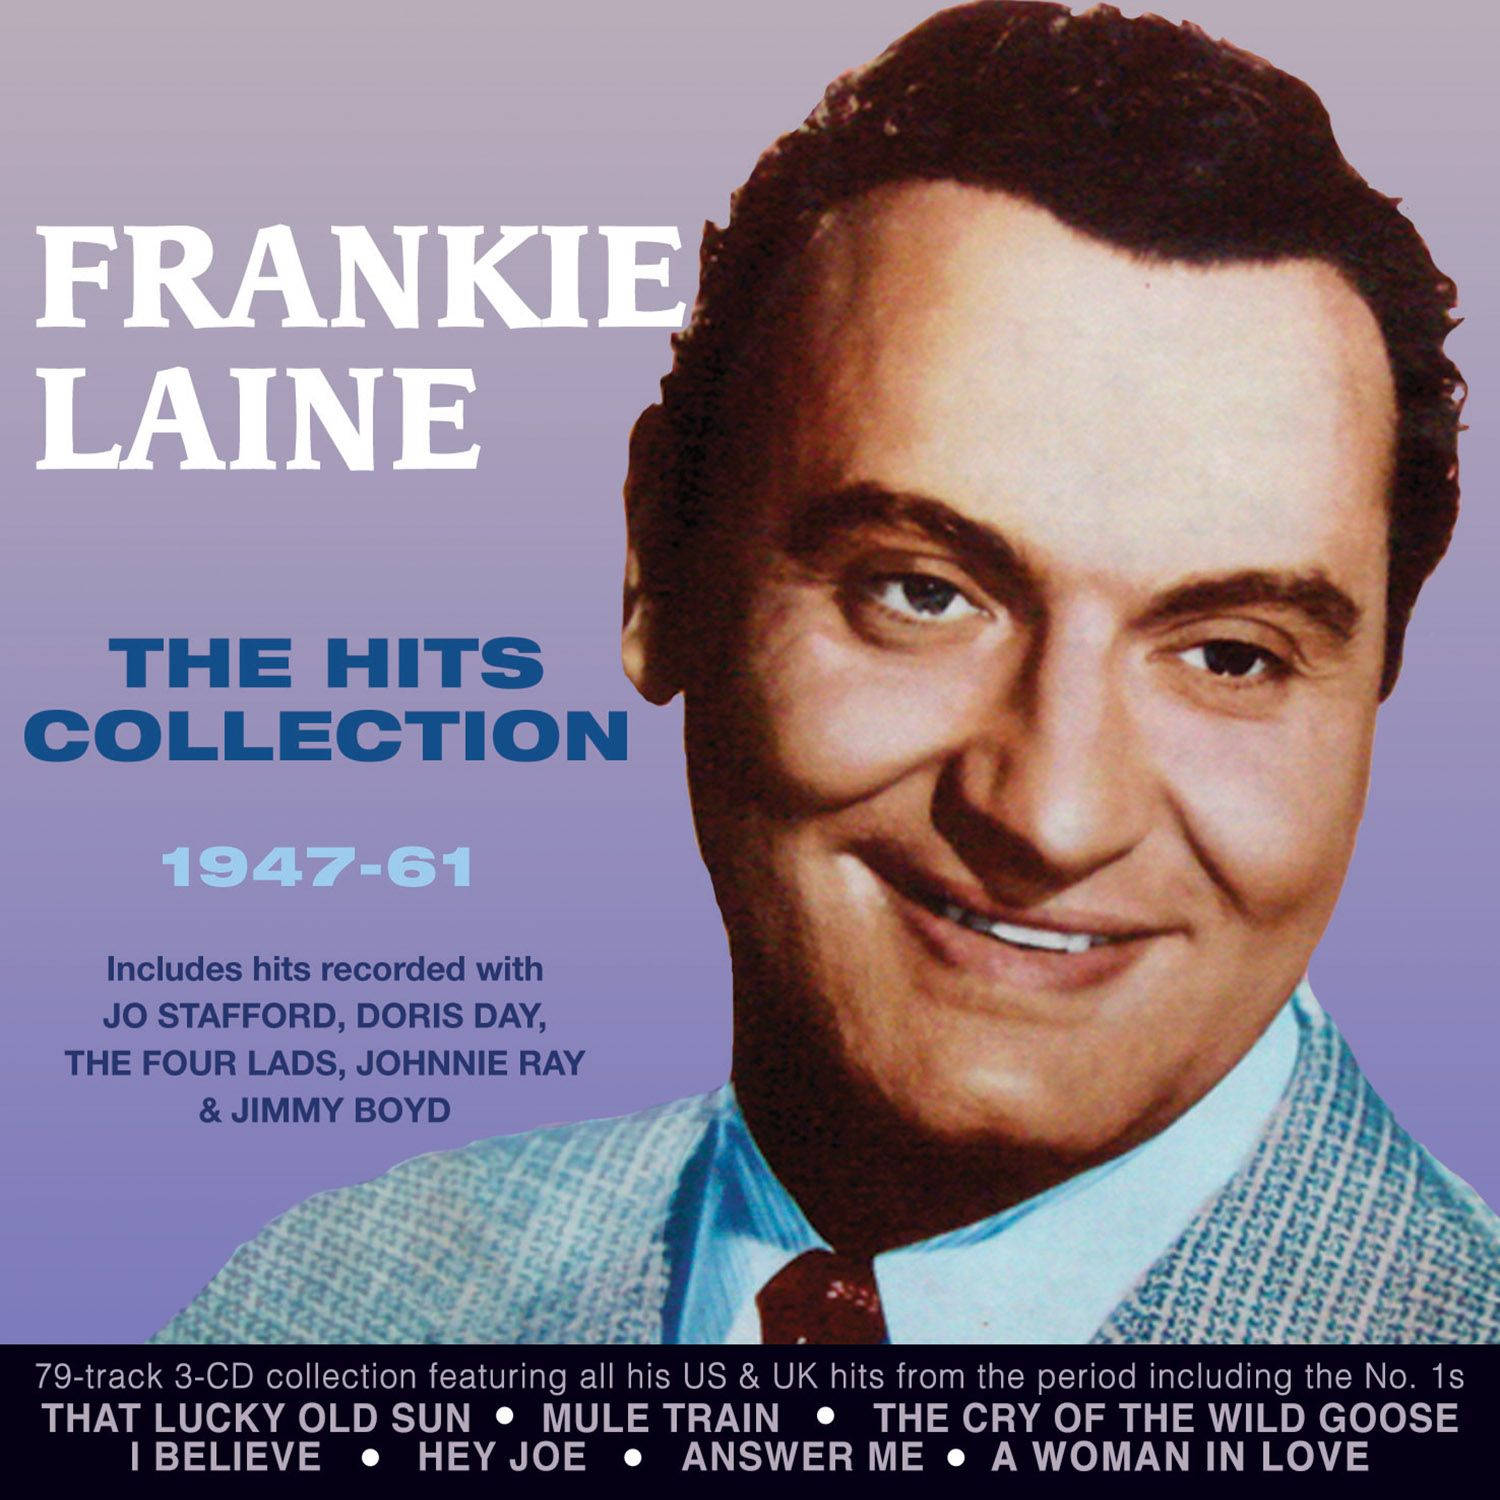 Frankie Laine The Hits Collection Album Wallpaper